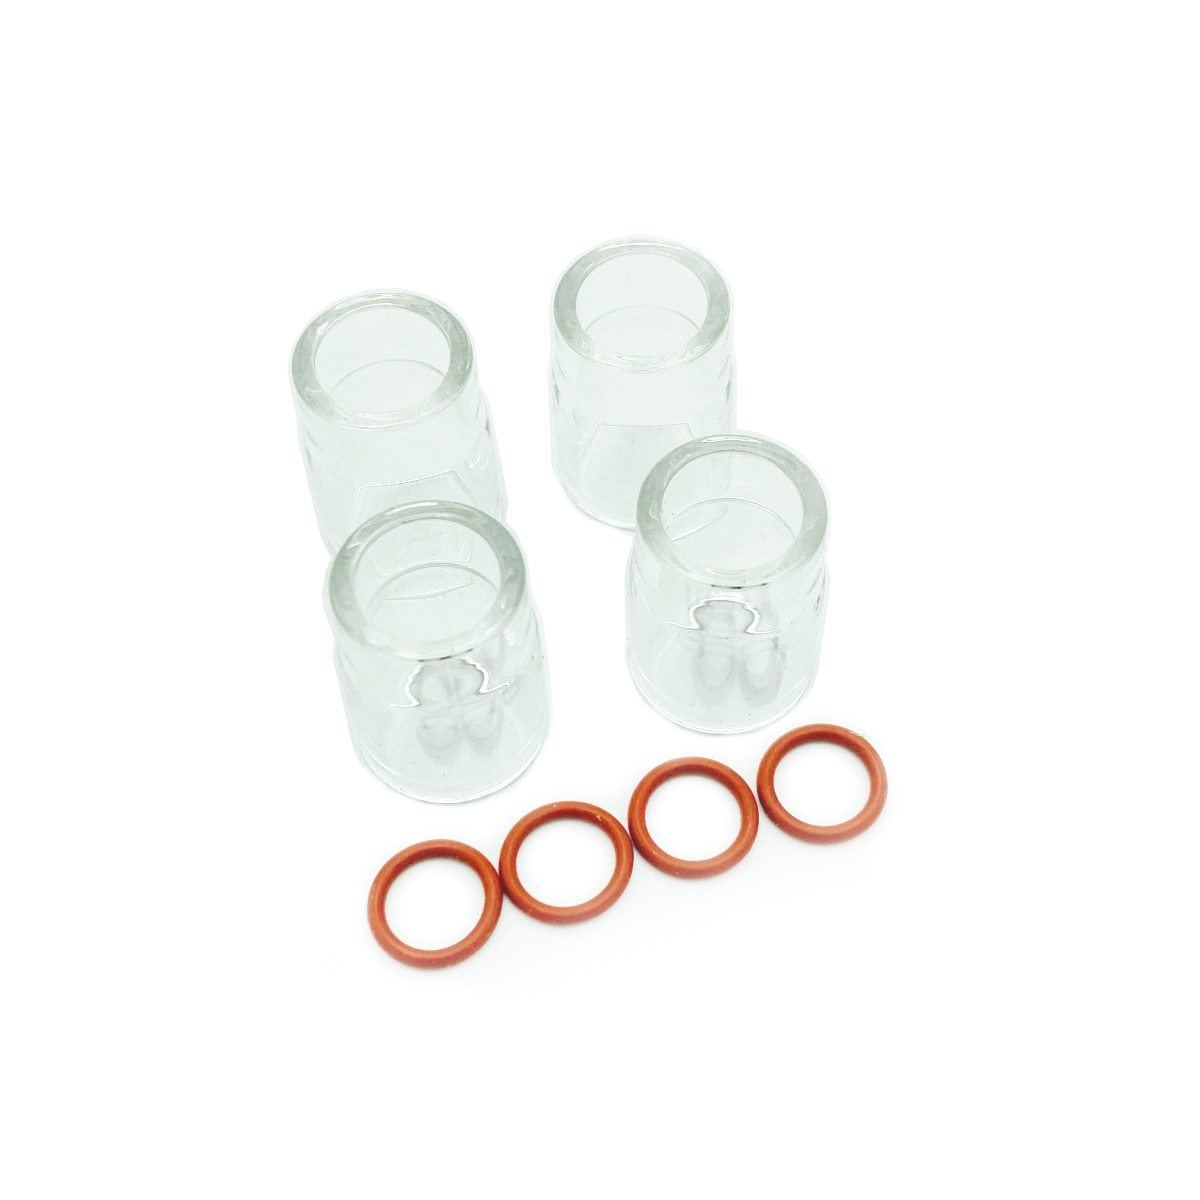 Furick Cups and Adapter Kits